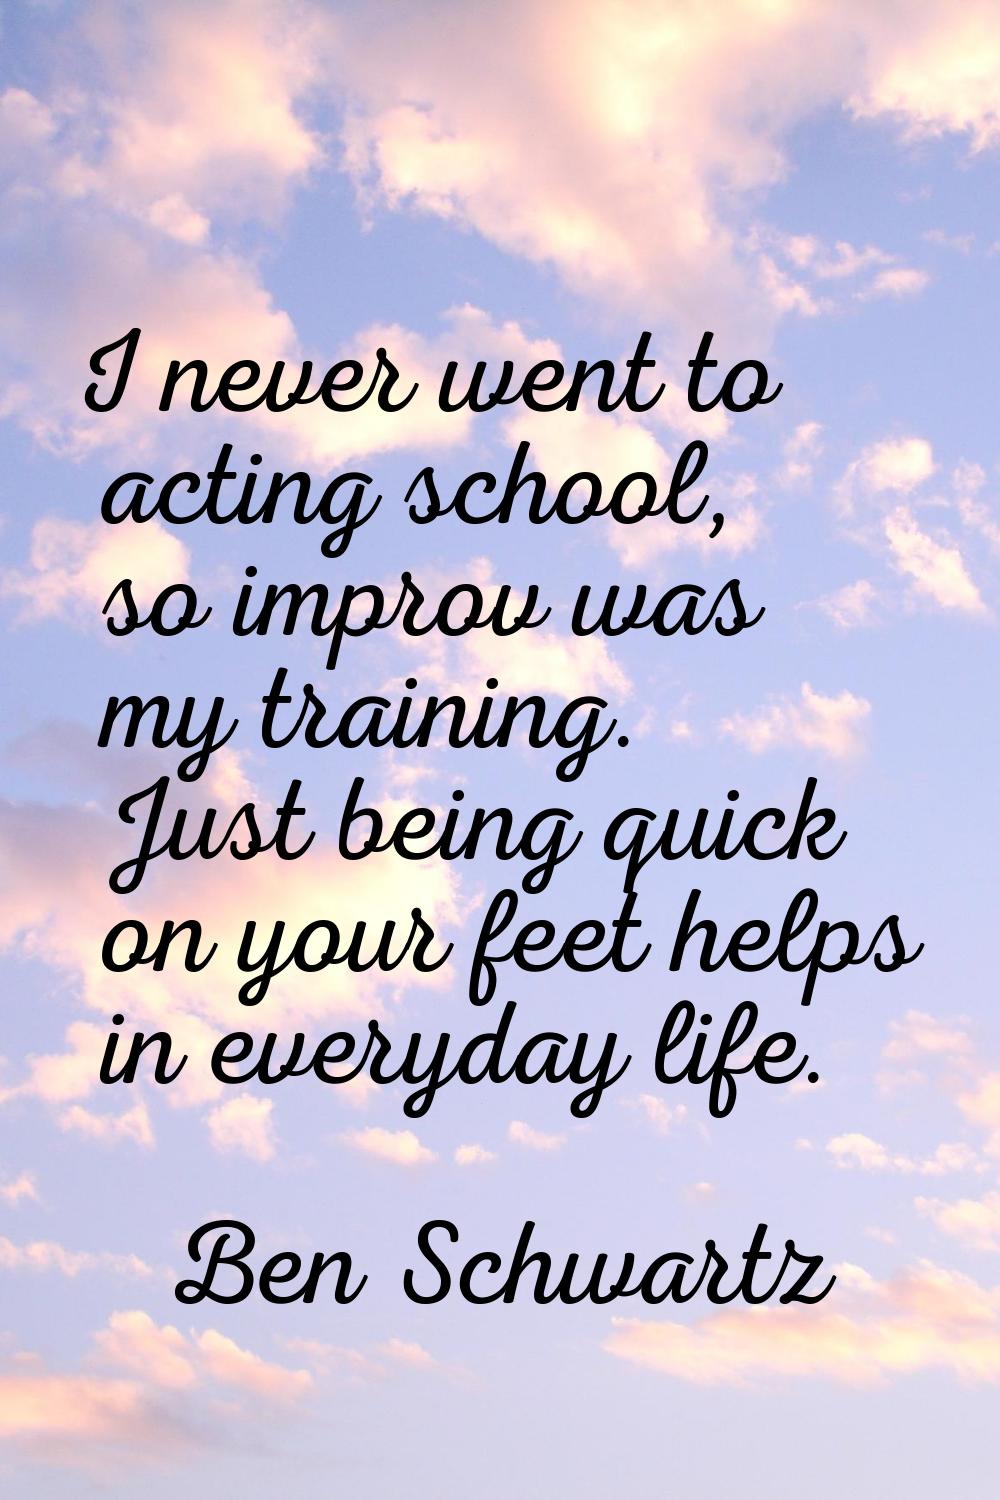 I never went to acting school, so improv was my training. Just being quick on your feet helps in ev